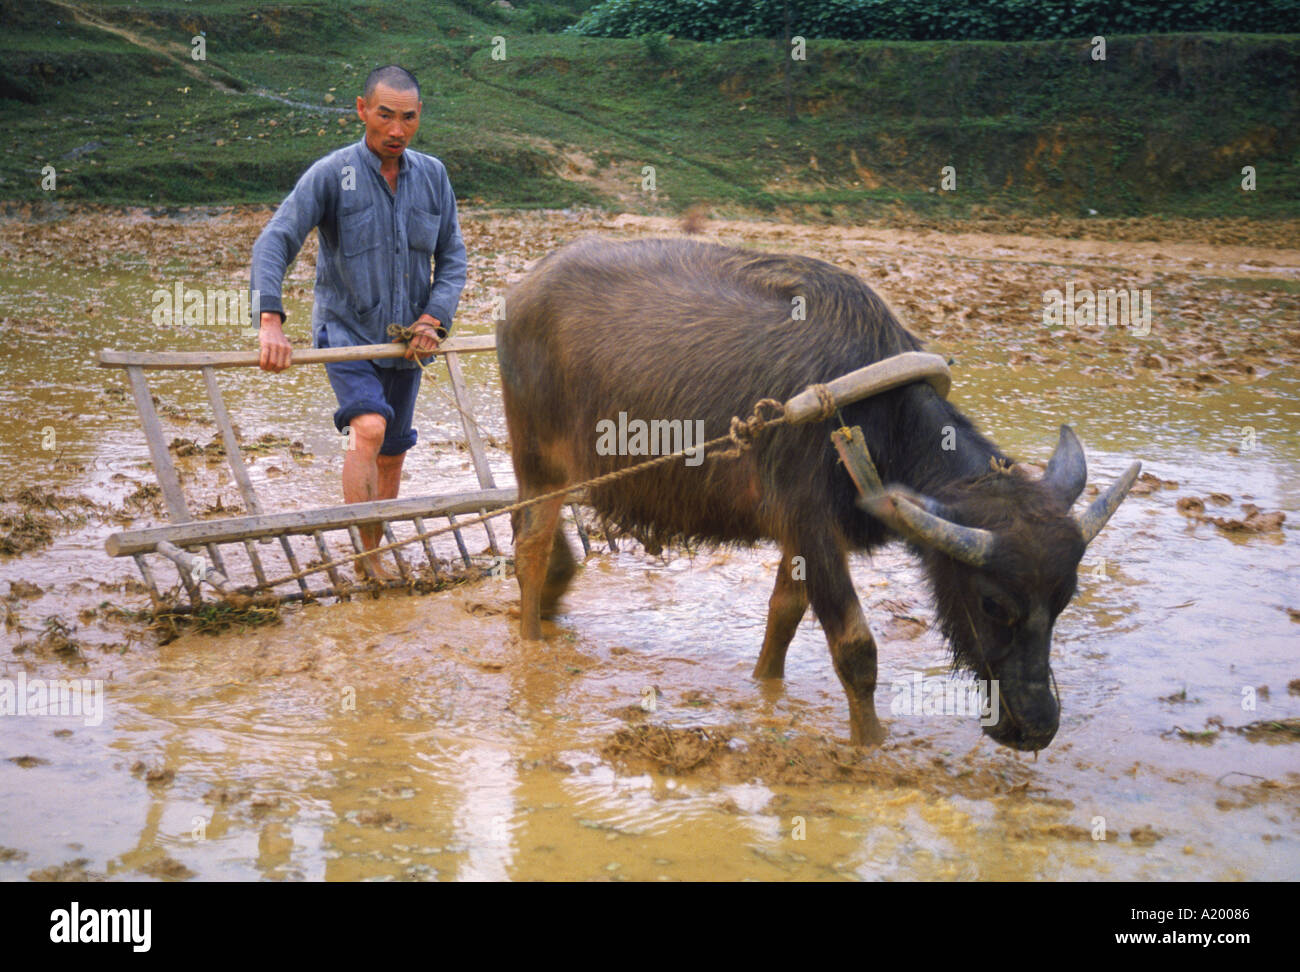 Farmer with bullock plough in flooded field at Guilin China G Hellier Stock Photo